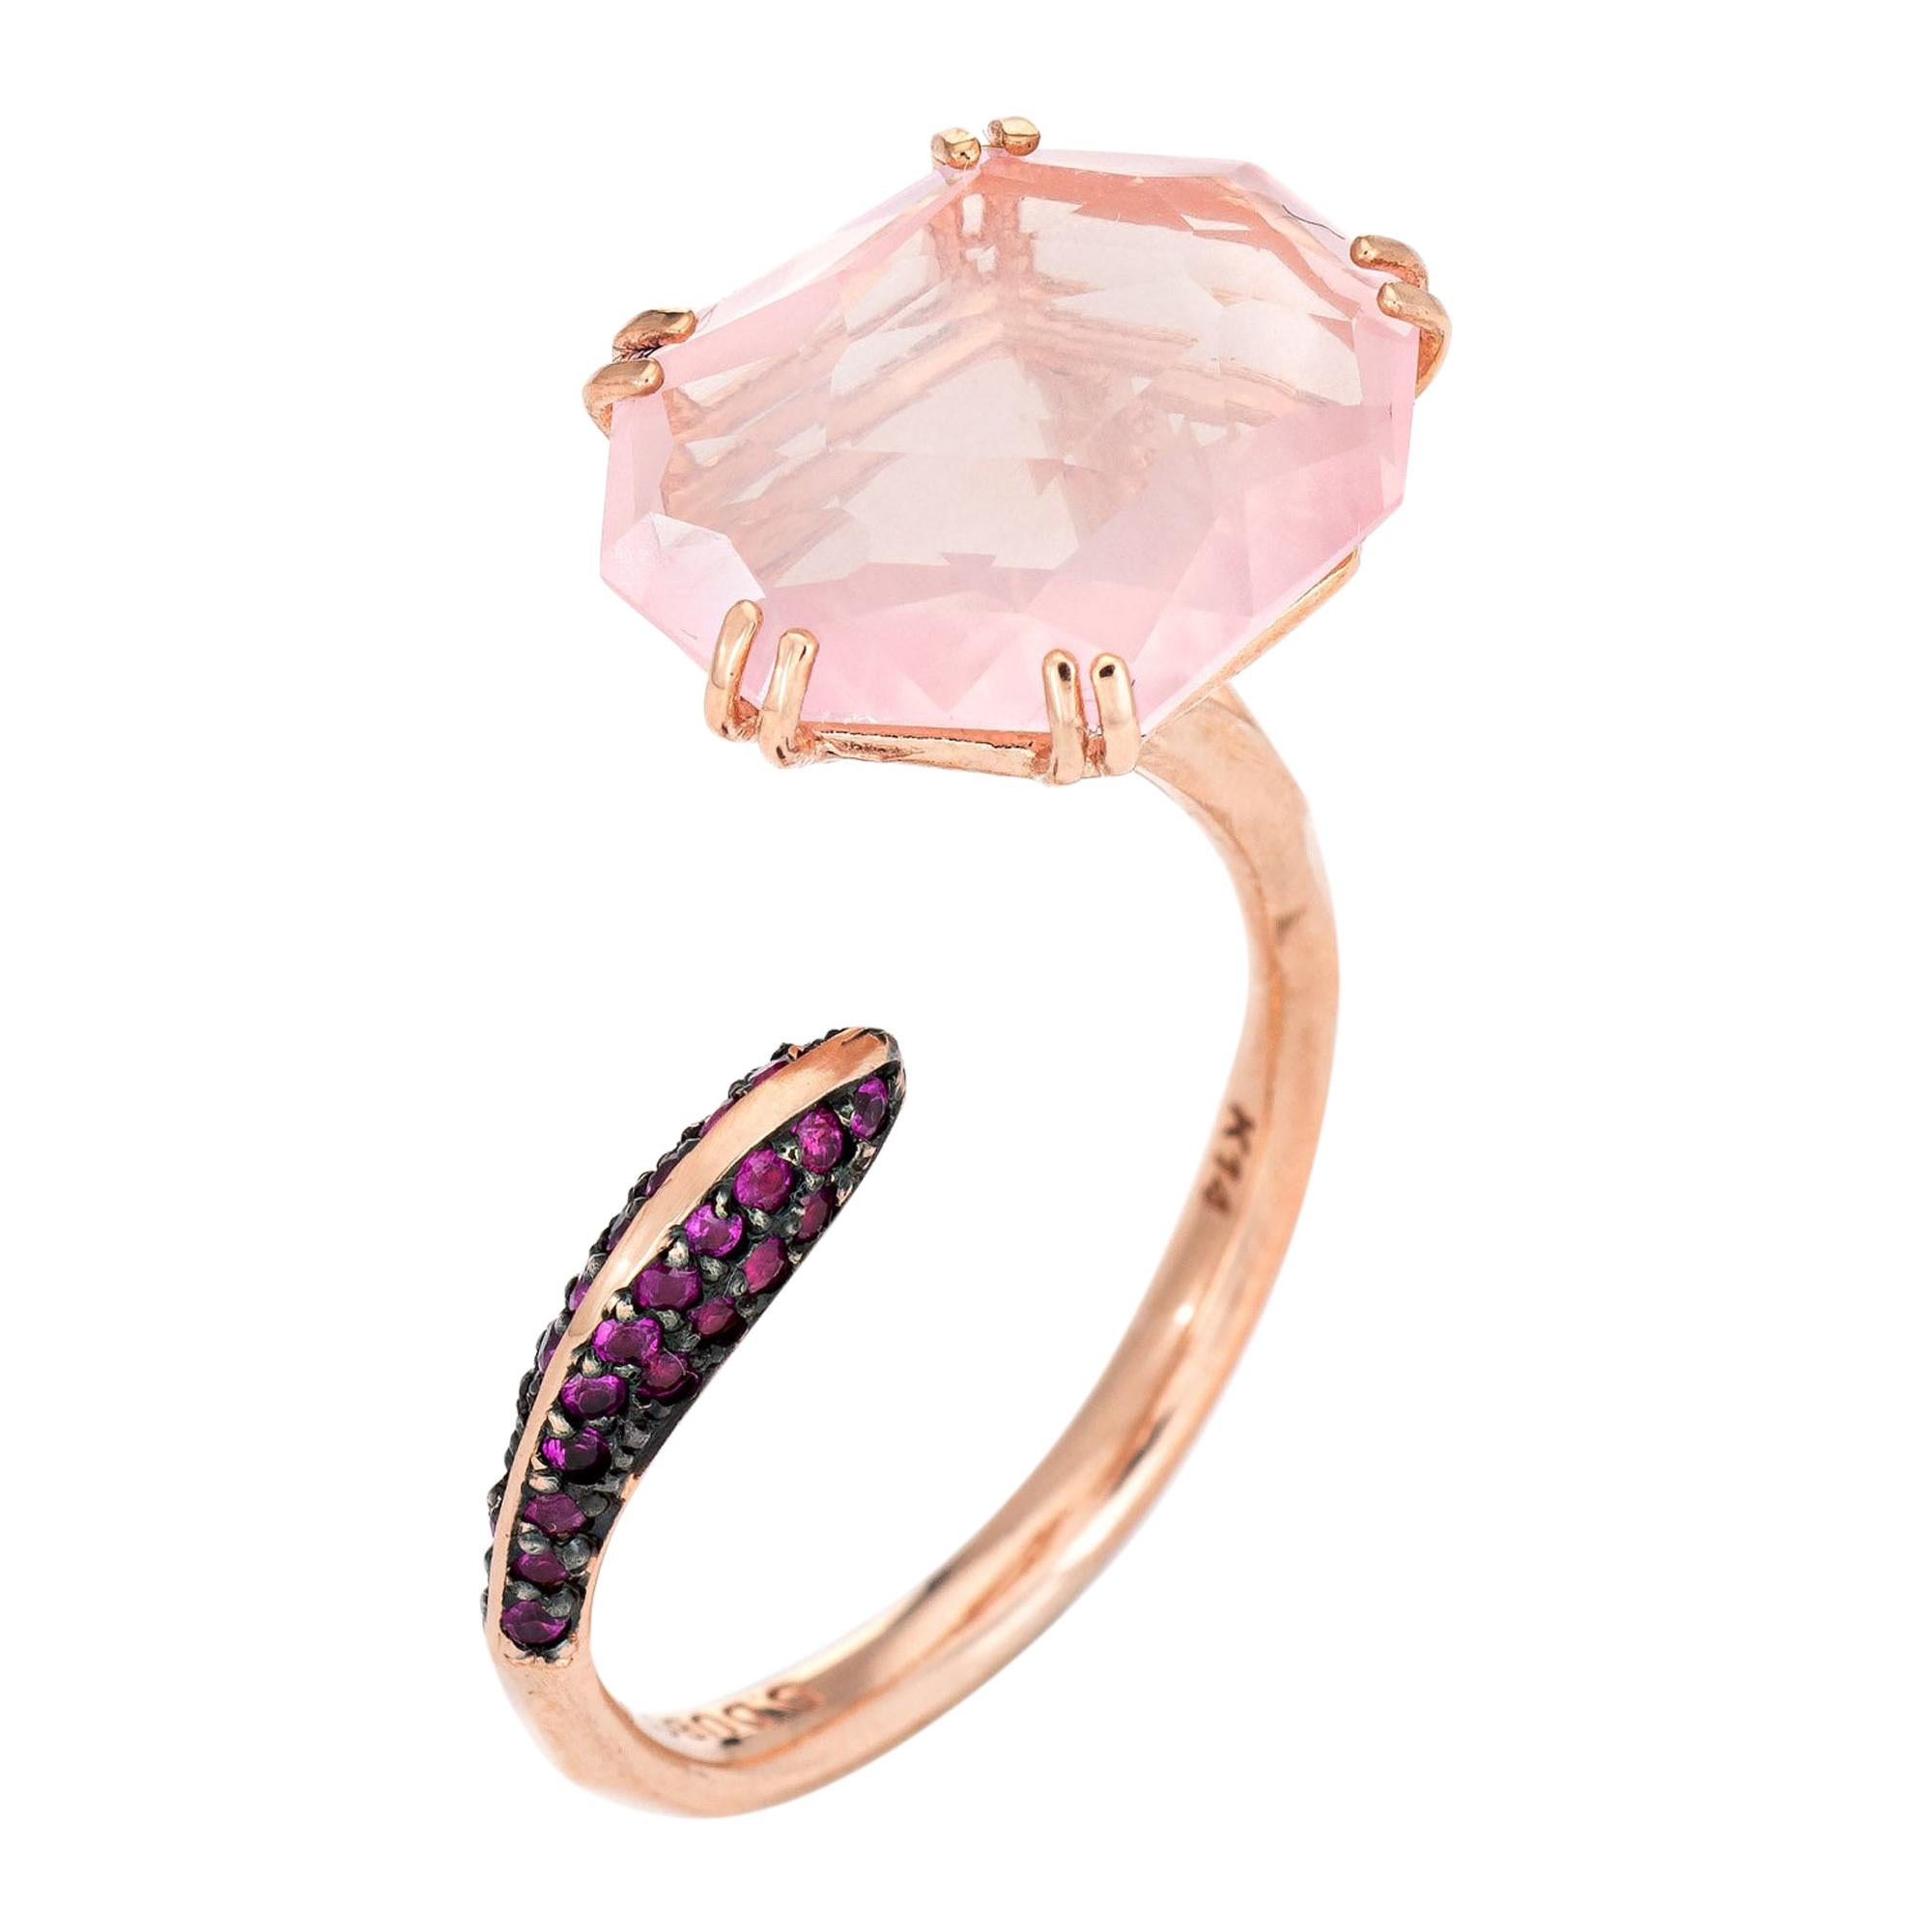 Didier Dubot Rose Quartz Ruby Ring Estate 14 Karat Gold Abstract Korea Jewelry For Sale